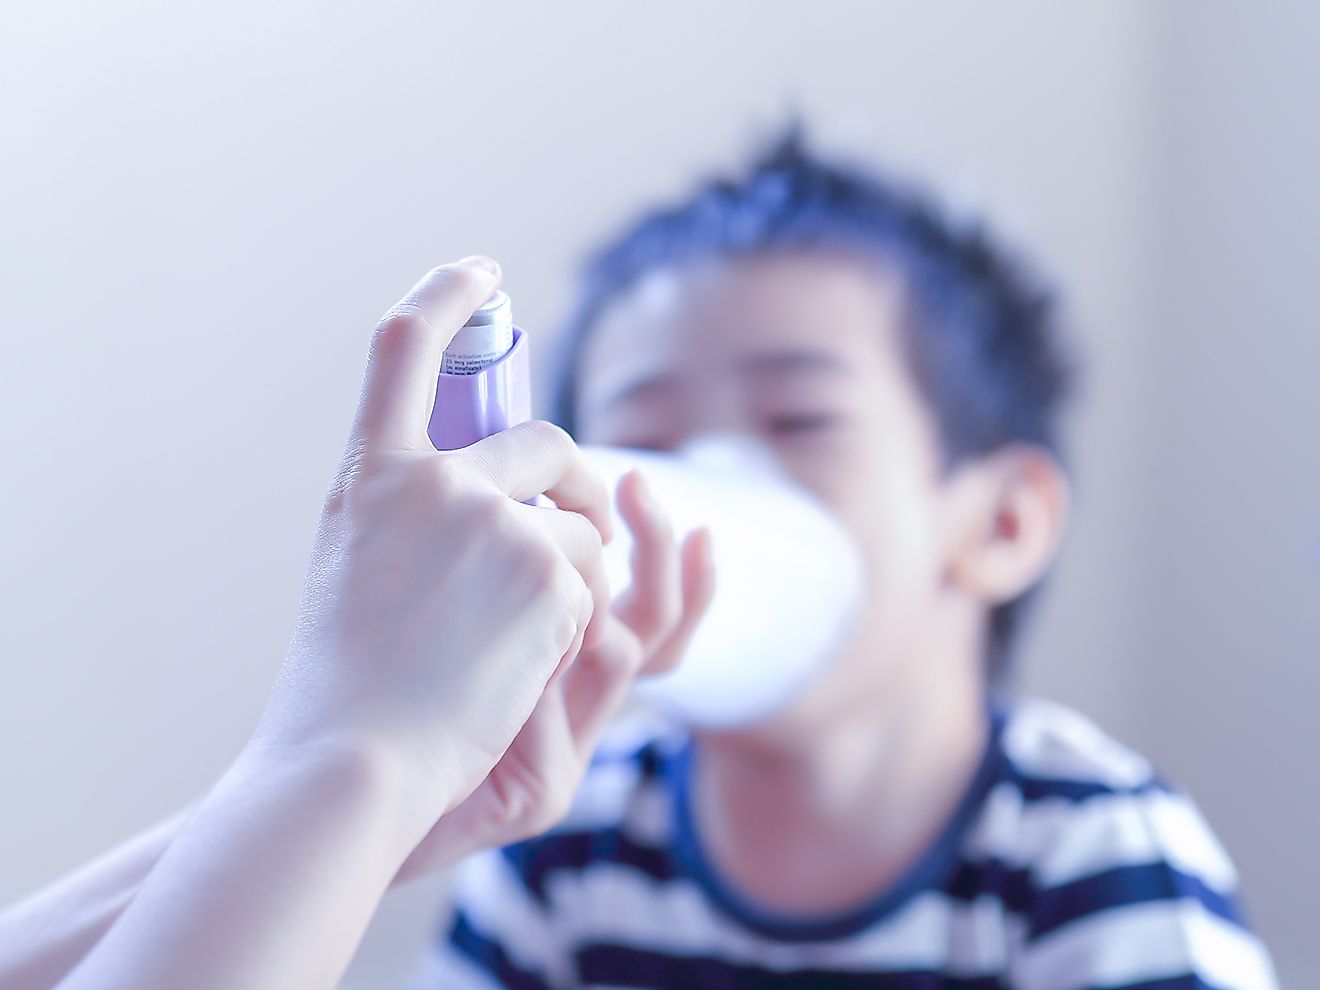 A child suffering from an asthma attack receiving treatment. Image credit: Goldenjack/Shutterstock.com